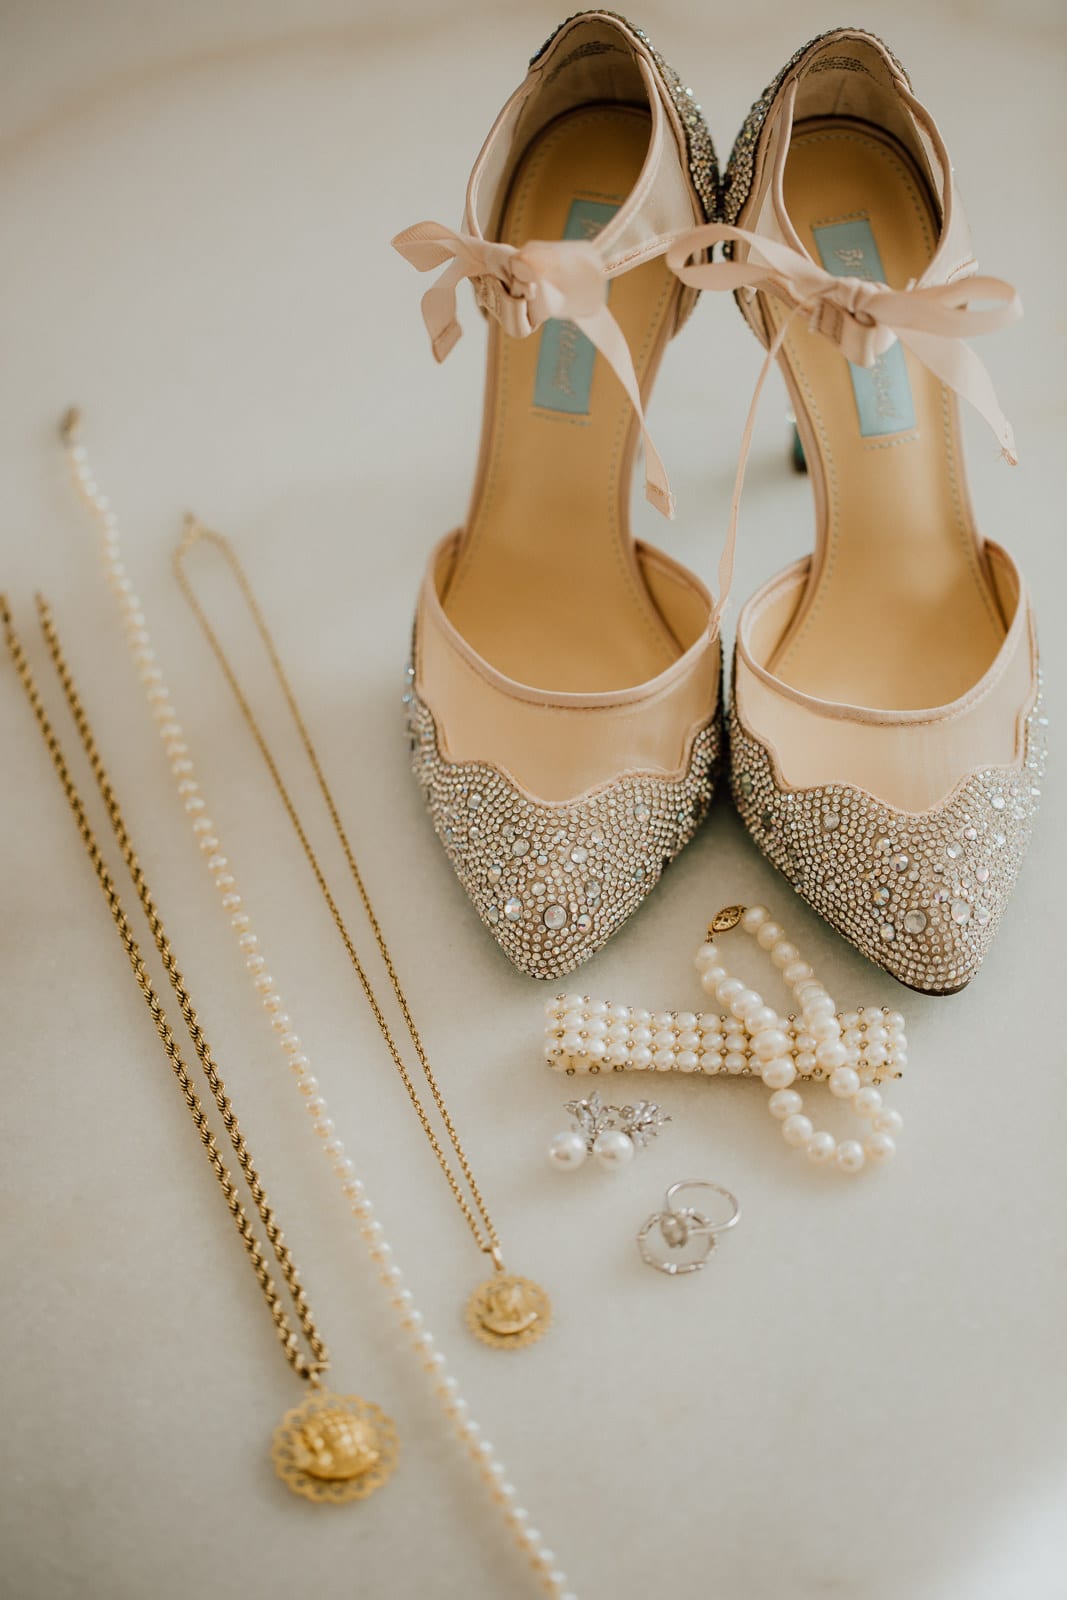 details of pearl wedding jewelry, religious items, shoes